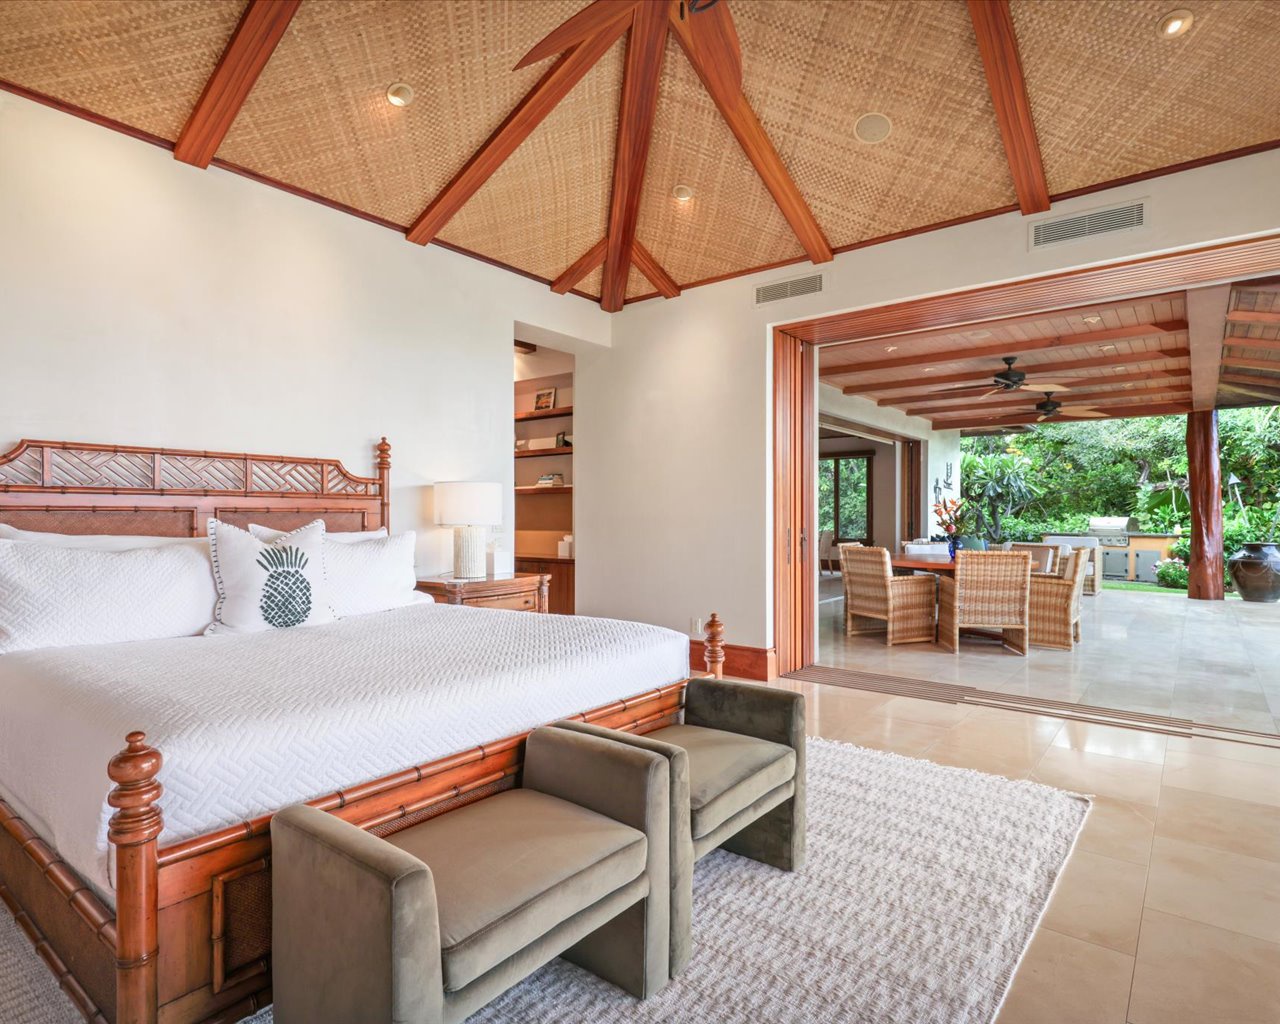 Kailua Kona Vacation Rentals, 3BD Pakui Street (131) Estate Home at Four Seasons Resort at Hualalai - Primary bedroom suite with a king bed, lanai access, smart TV, personal desk & an en suite bath